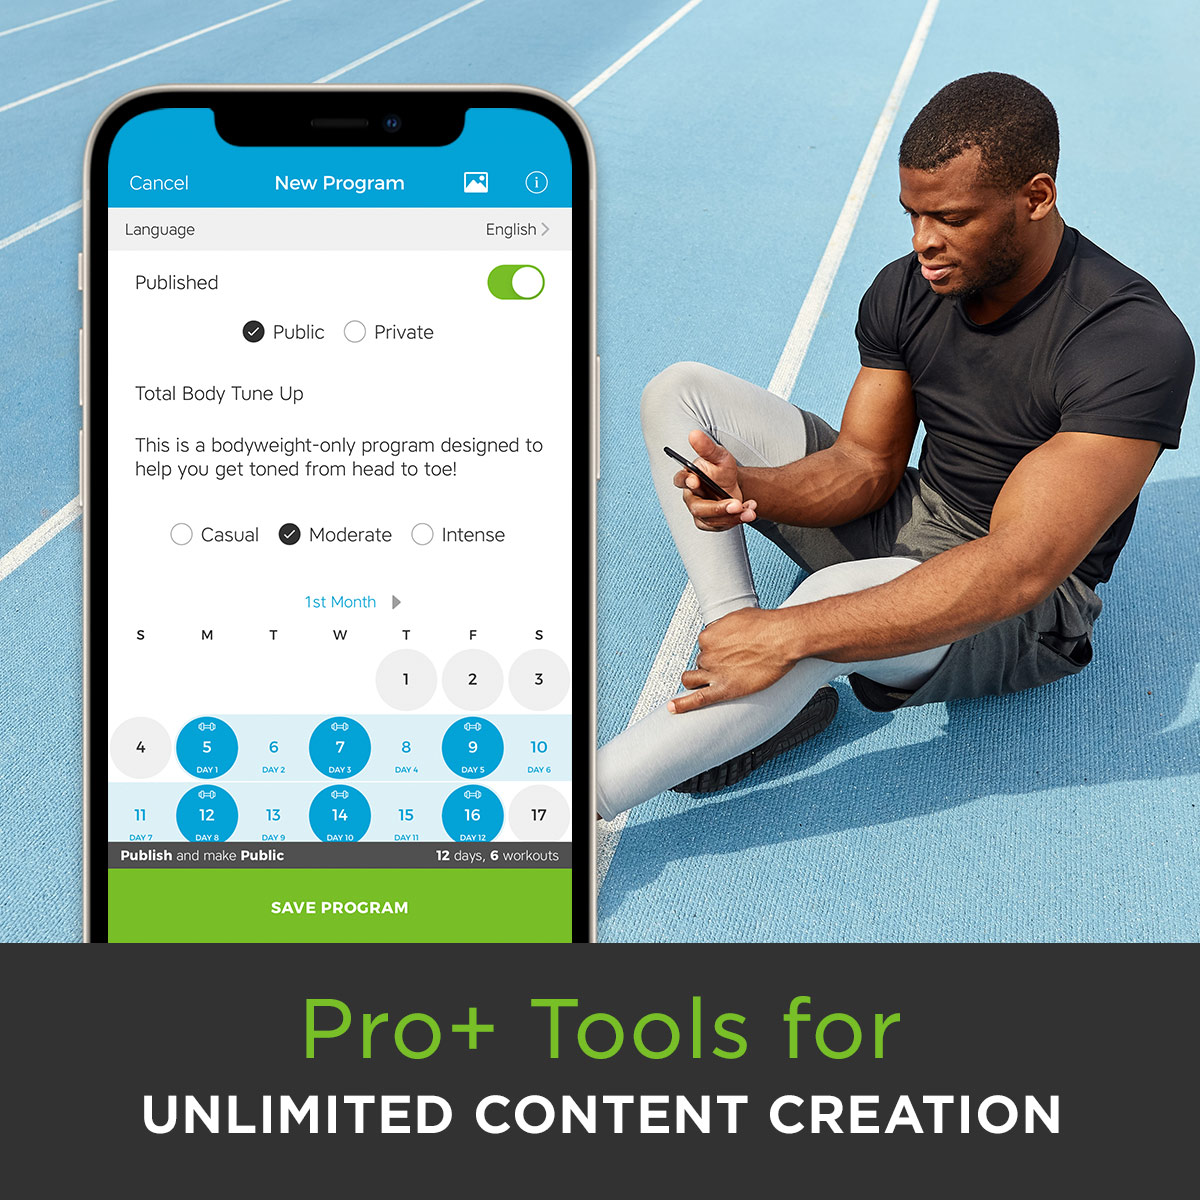 Workout Trainer: Create Unlimited Exercises, Workouts, & Programs with a Pro+ Membership